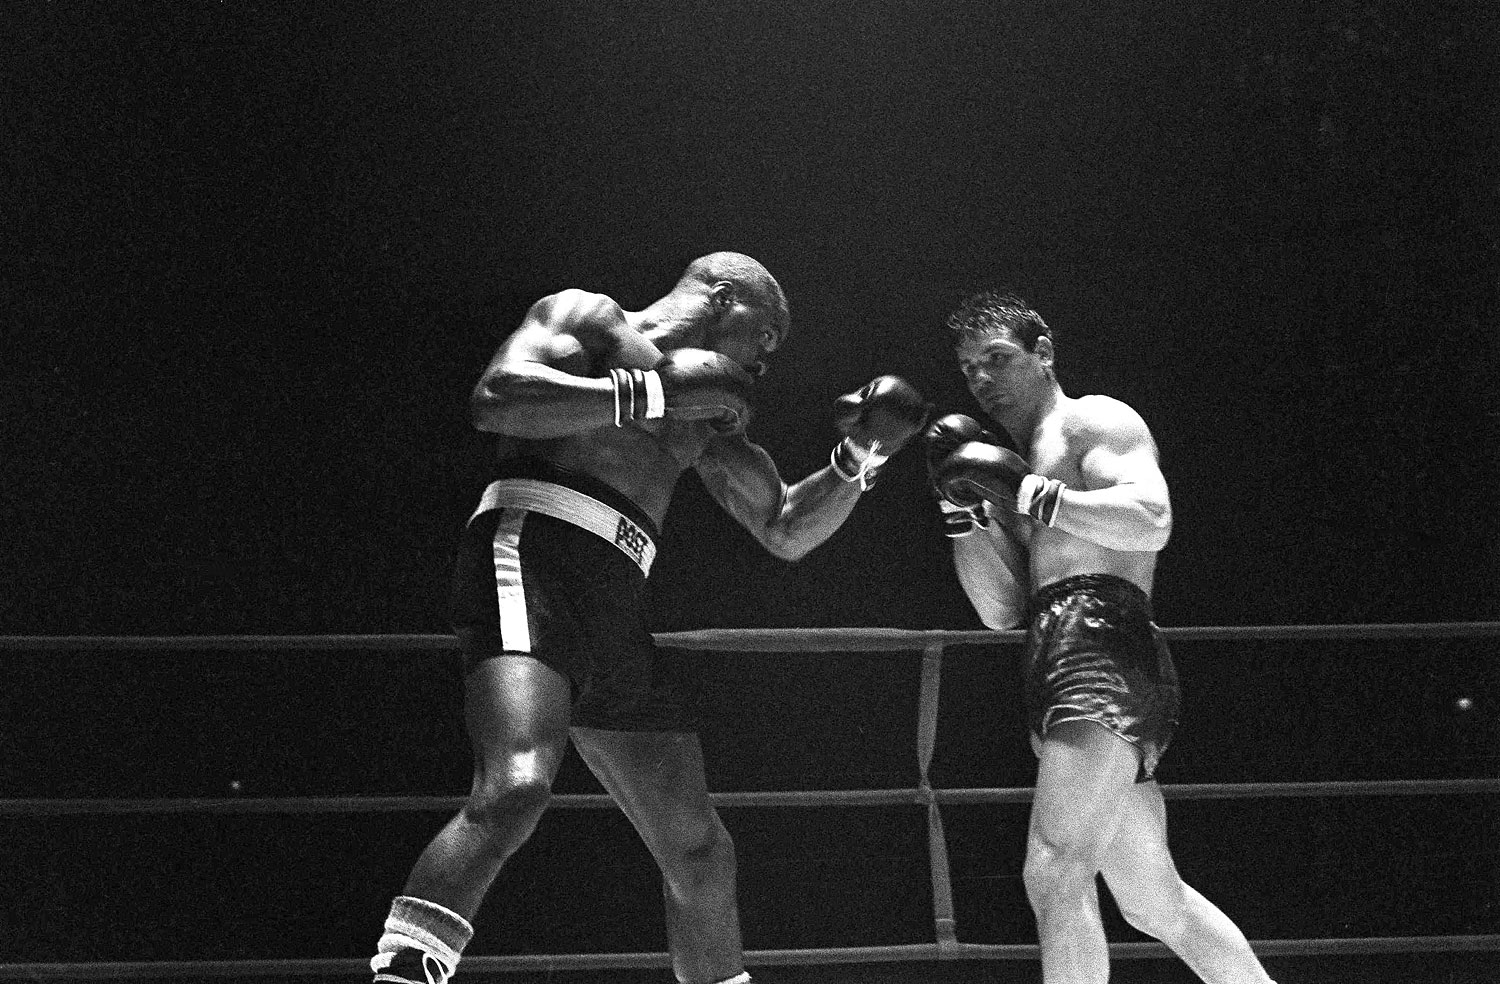 Rubin "Hurricane" Carter, left, knocks out Italian boxer Fabio Bettini in the 10th and last round of their fight at the Falais Des Sports in Paris, Feb. 23, 1965. (AP)